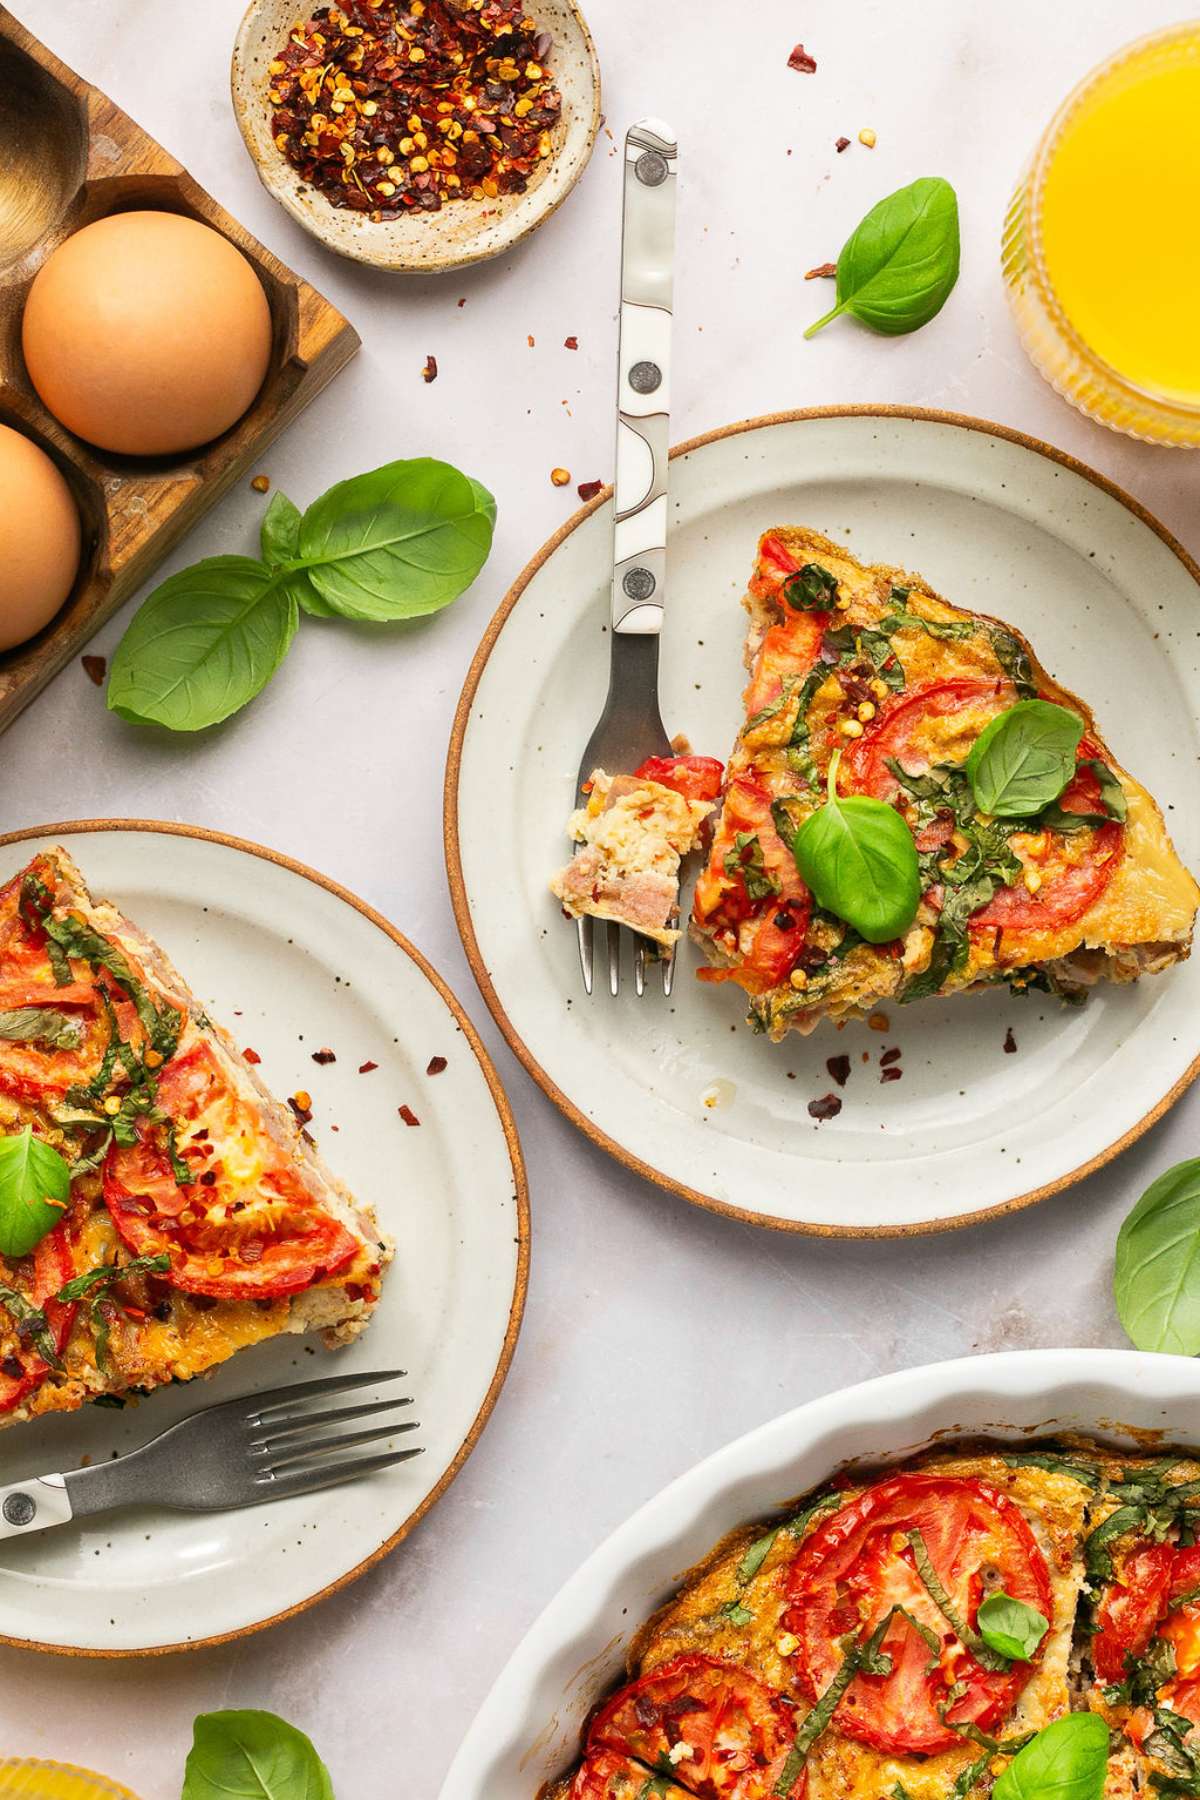 Sausage Tomato Breakfast Pizza! A simple one-pan dish made with fresh vegetables and herbs with the flavors of pizza. A Paleo, gluten free and low calorie breakfast that's healthy, nourishing and delicious! #eggbake #frittata 